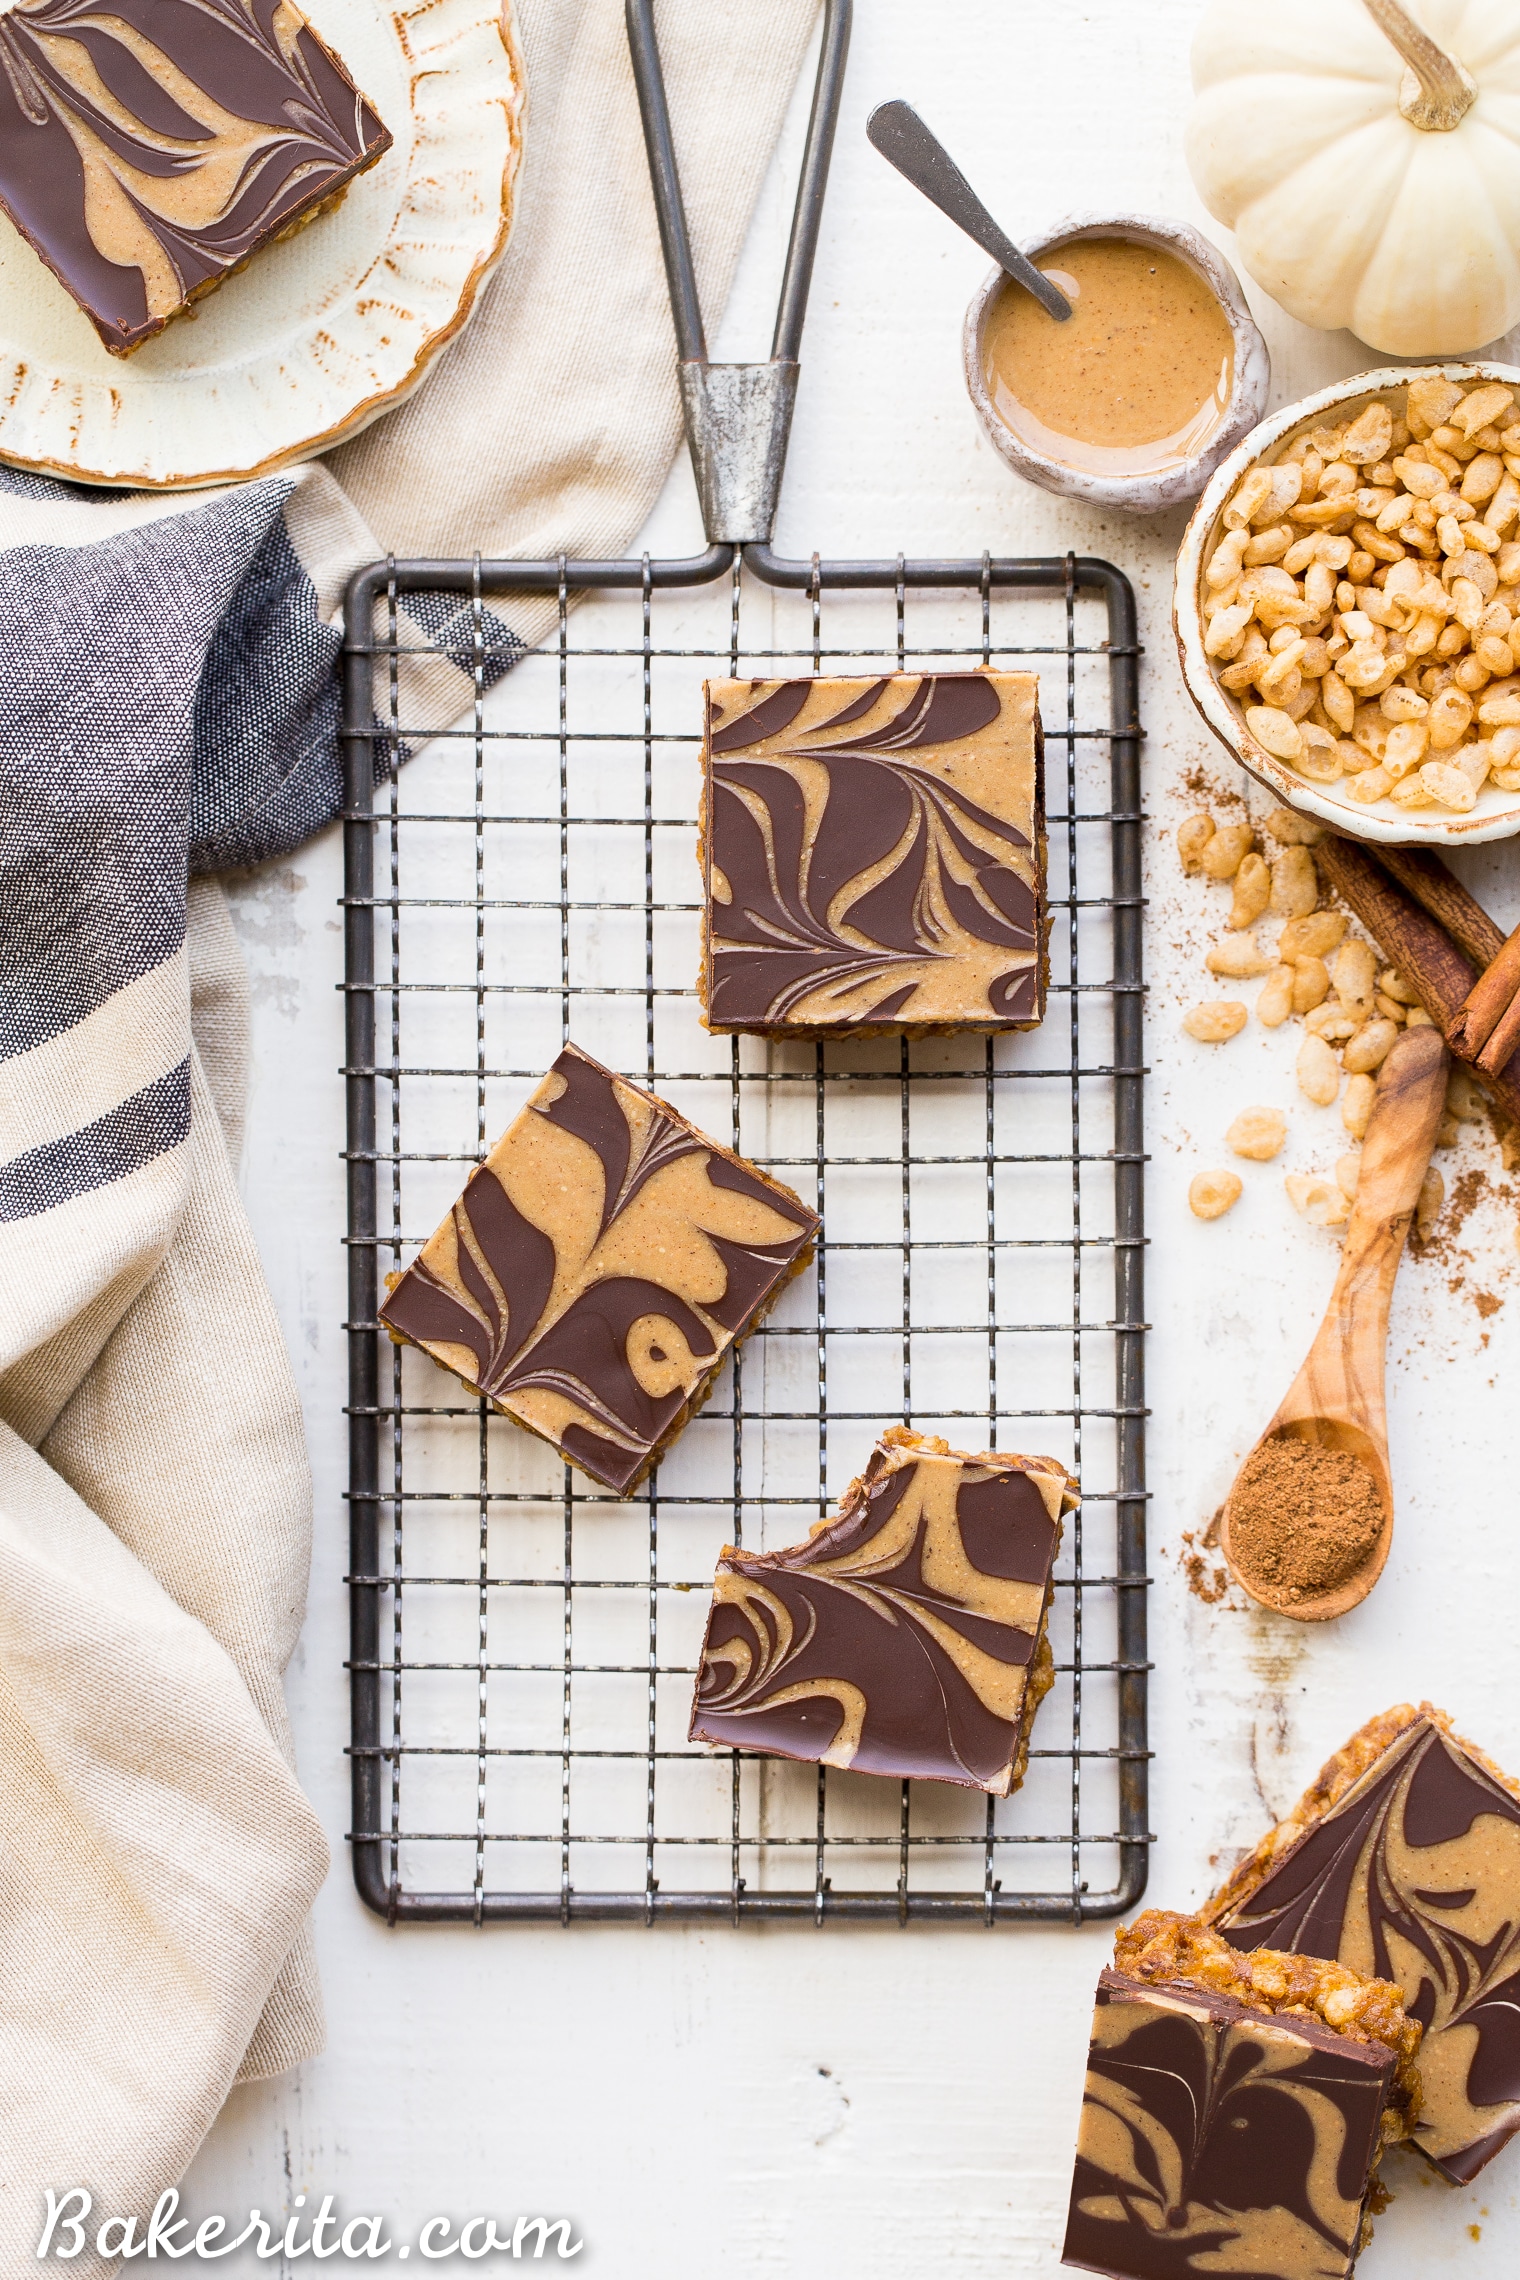 These Chocolate Pumpkin Spice Crispy Bars have a pumpkin spice rice crispy base, topped with a layer of dark chocolate and a pumpkin spice swirl. These bars are easy to make, beautiful, delicious, and gluten-free + vegan!